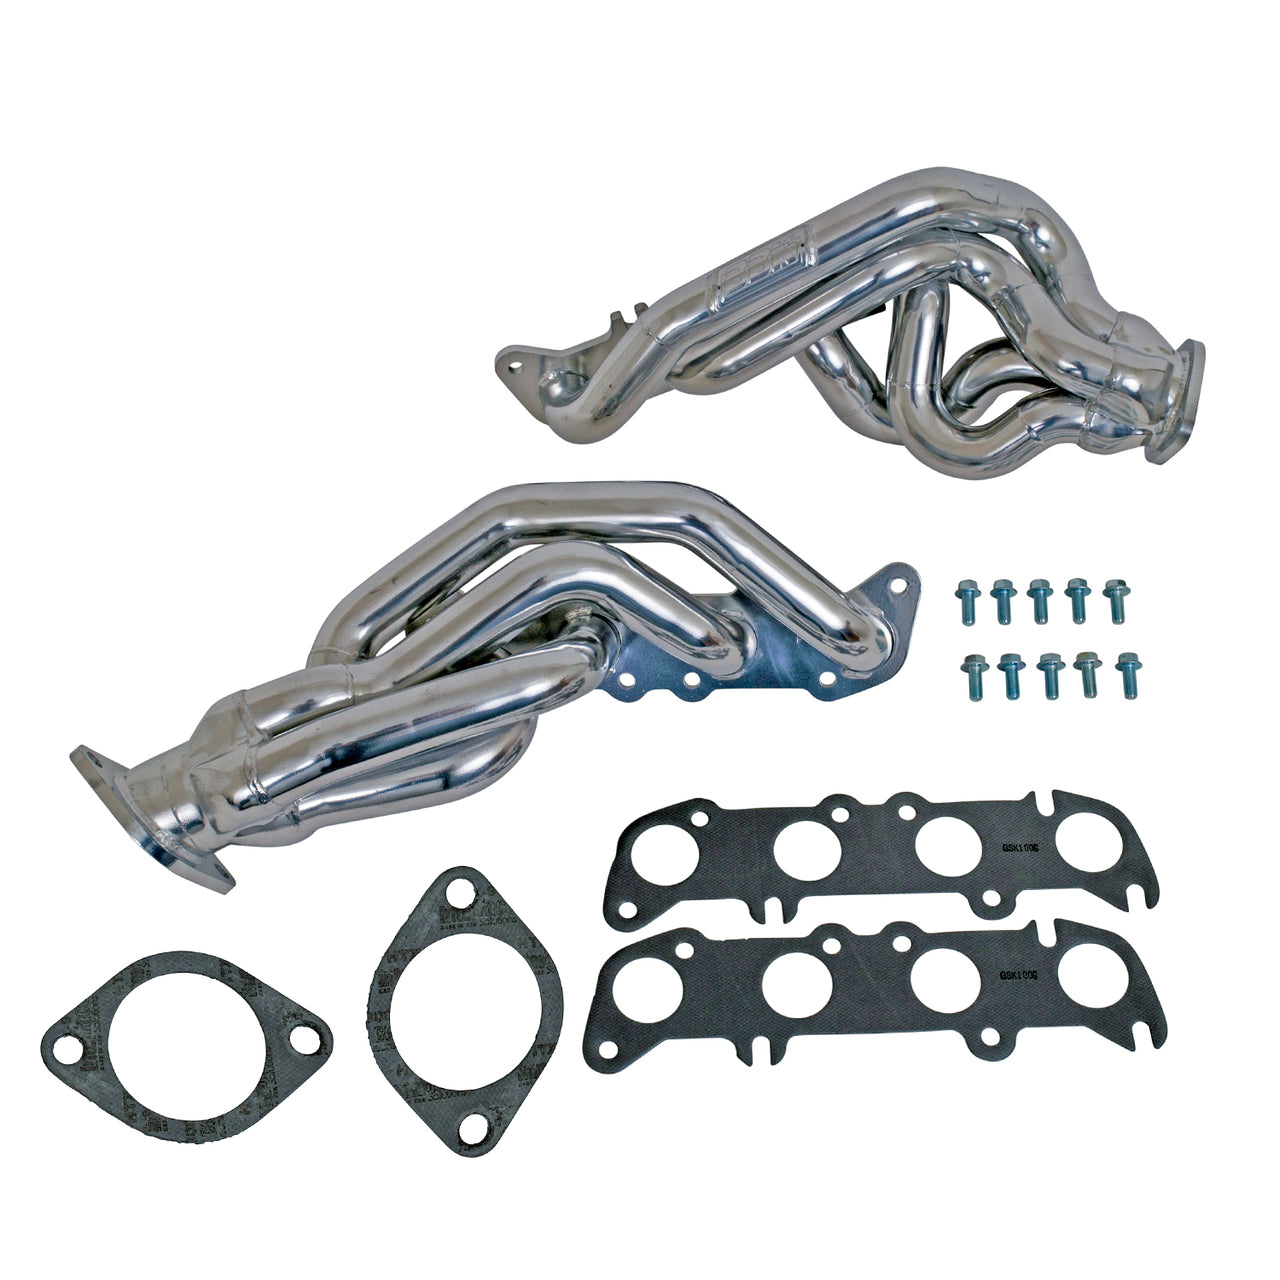 2011-2014 MUSTANG GT 1-3/4 TUNED LENGTH HEADERS- (POLISHED SILVER CERAMIC)